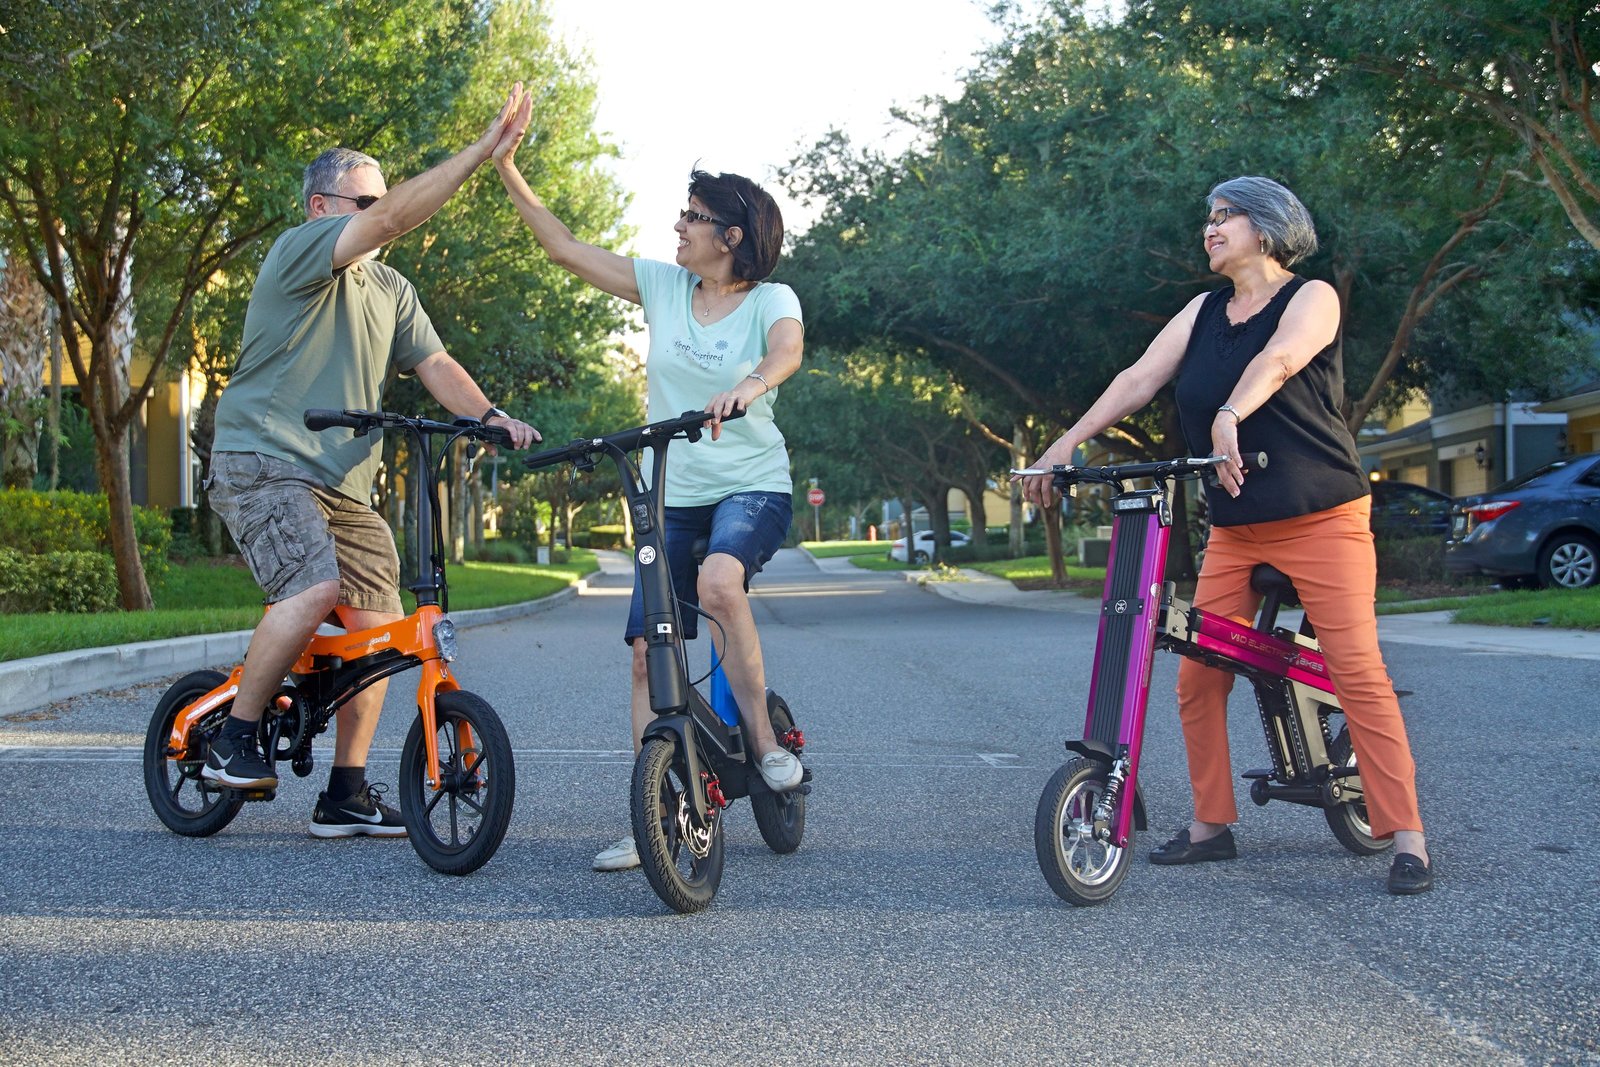 3 friends out for a joy ride on Go-Bikes